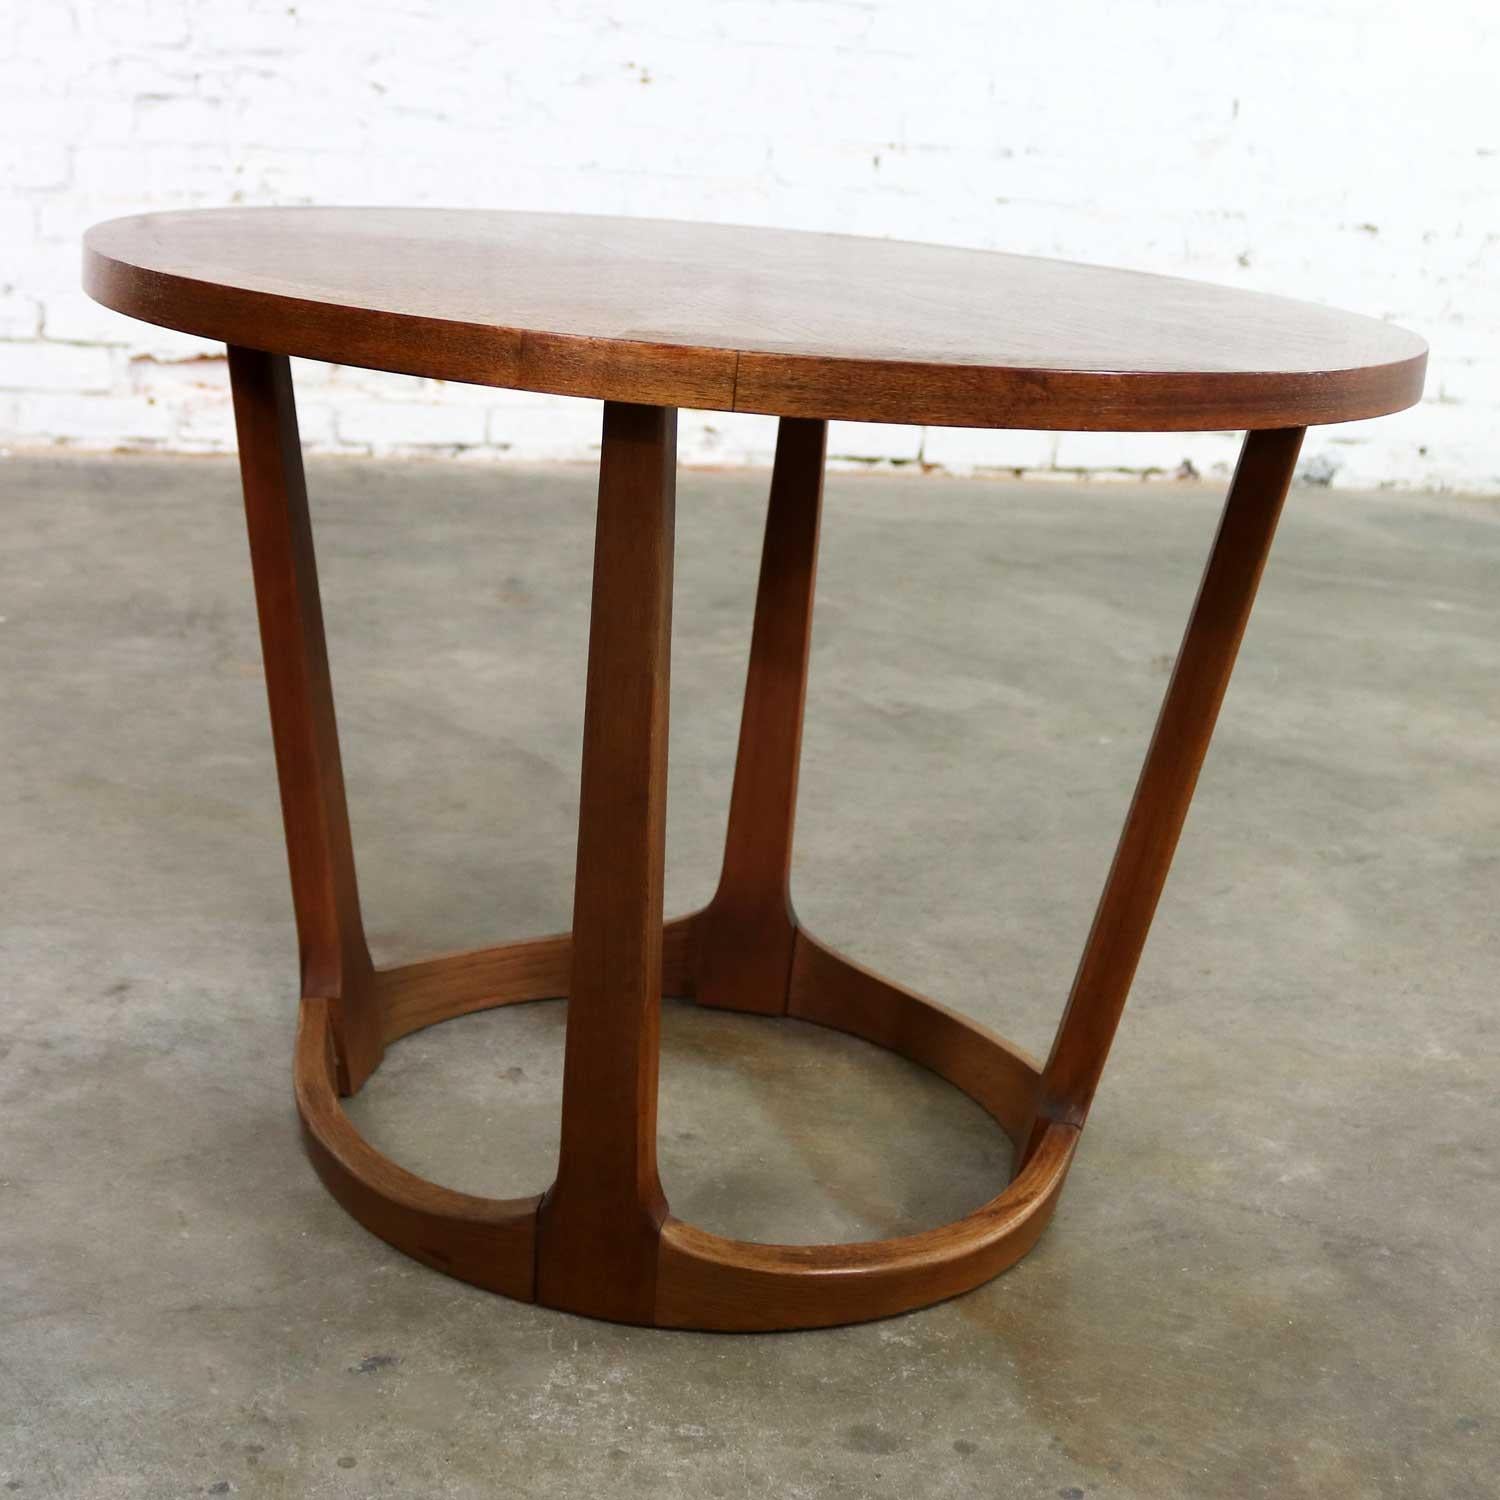 Mid-Century Modern Lane Round Drum End Table 997-22 from the Rhythm Collection 1